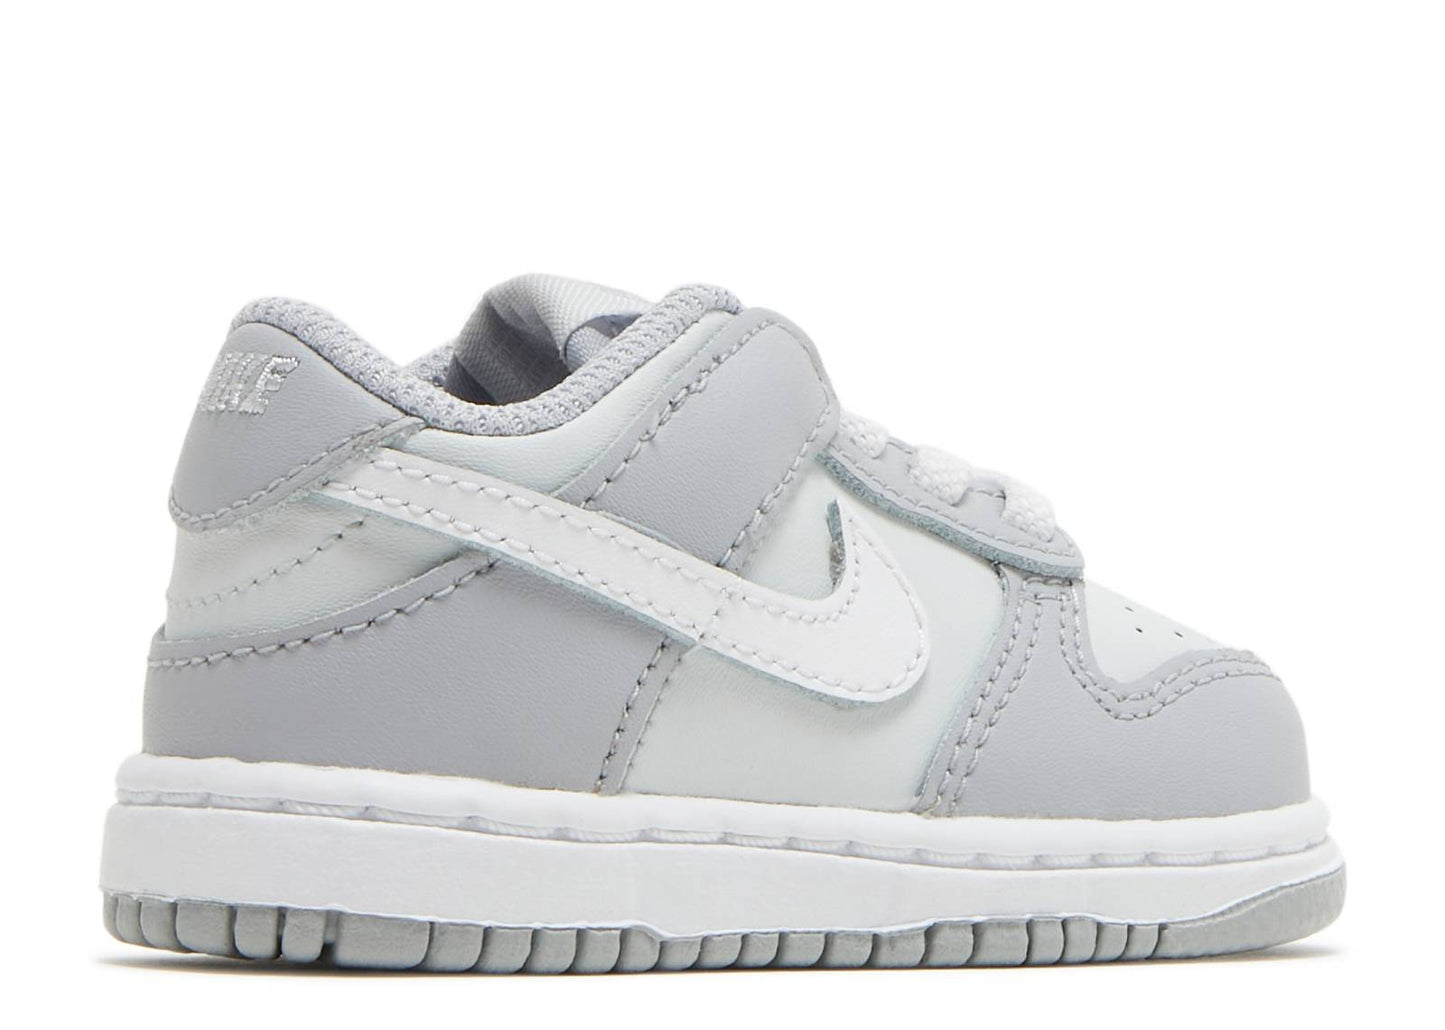 Nike Dunk Low TD "Two-Tone Grey/Pure Platinum"